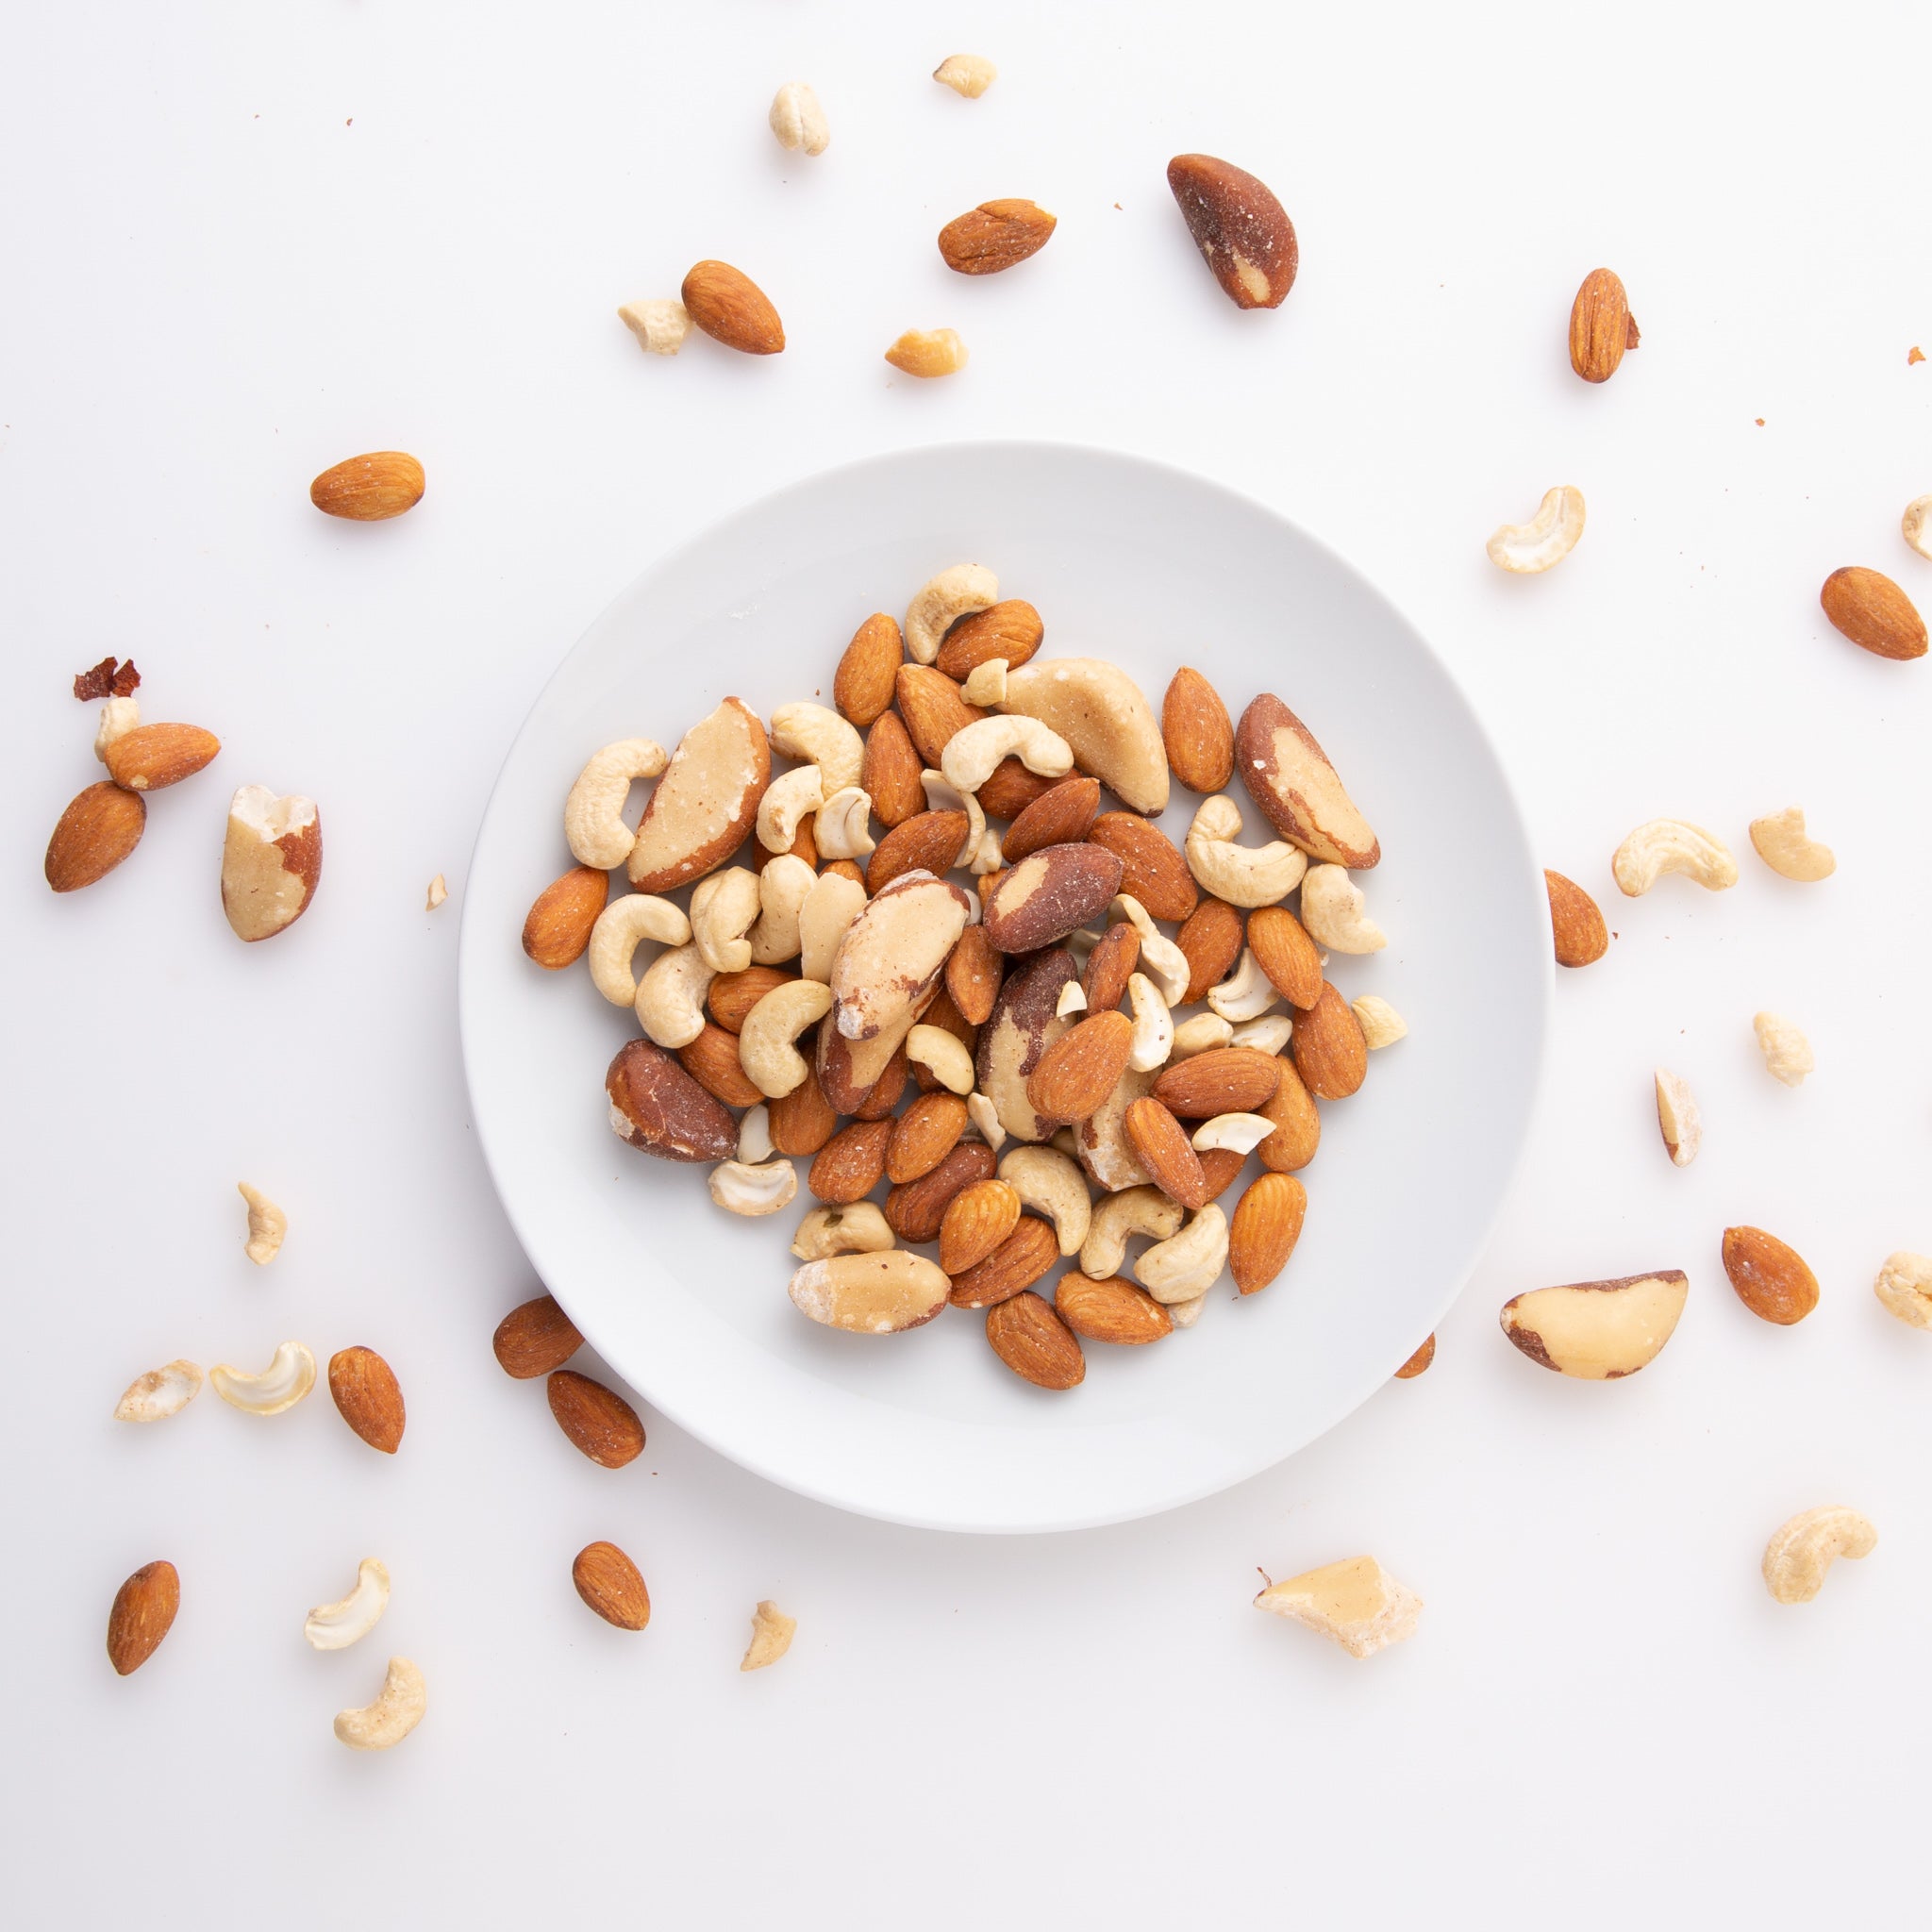 Organic ABC Mix Nuts (Raw Nuts) on small white plate - Naked Foods